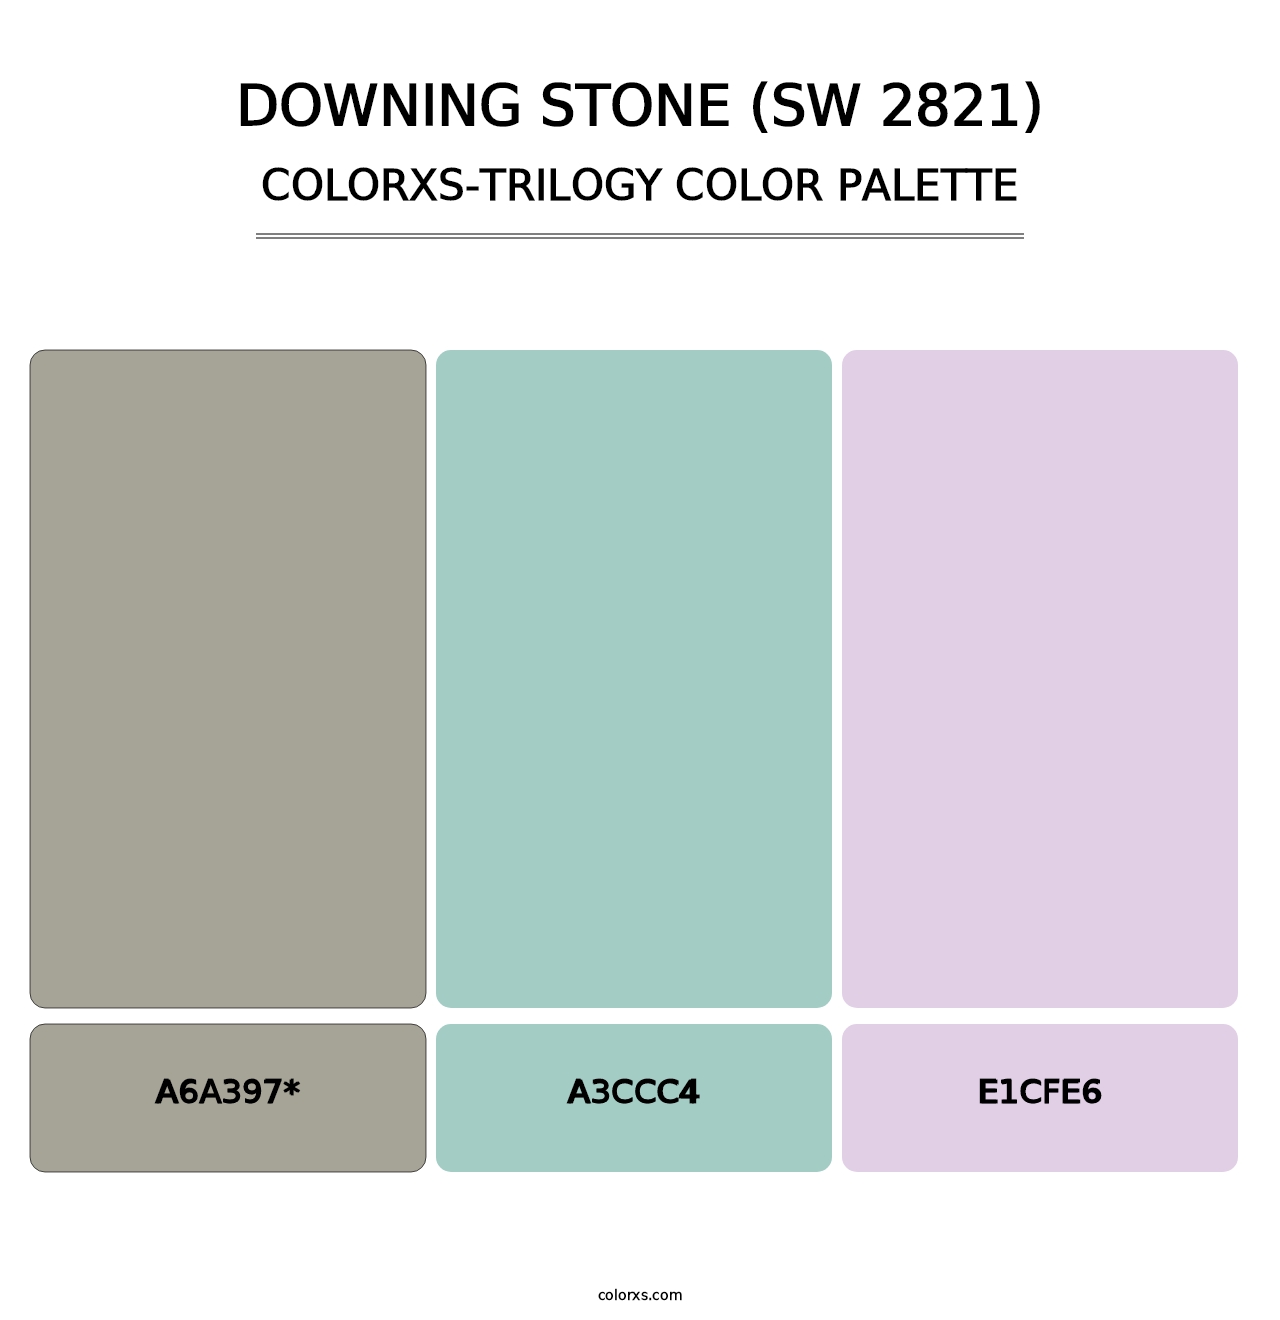 Downing Stone (SW 2821) - Colorxs Trilogy Palette